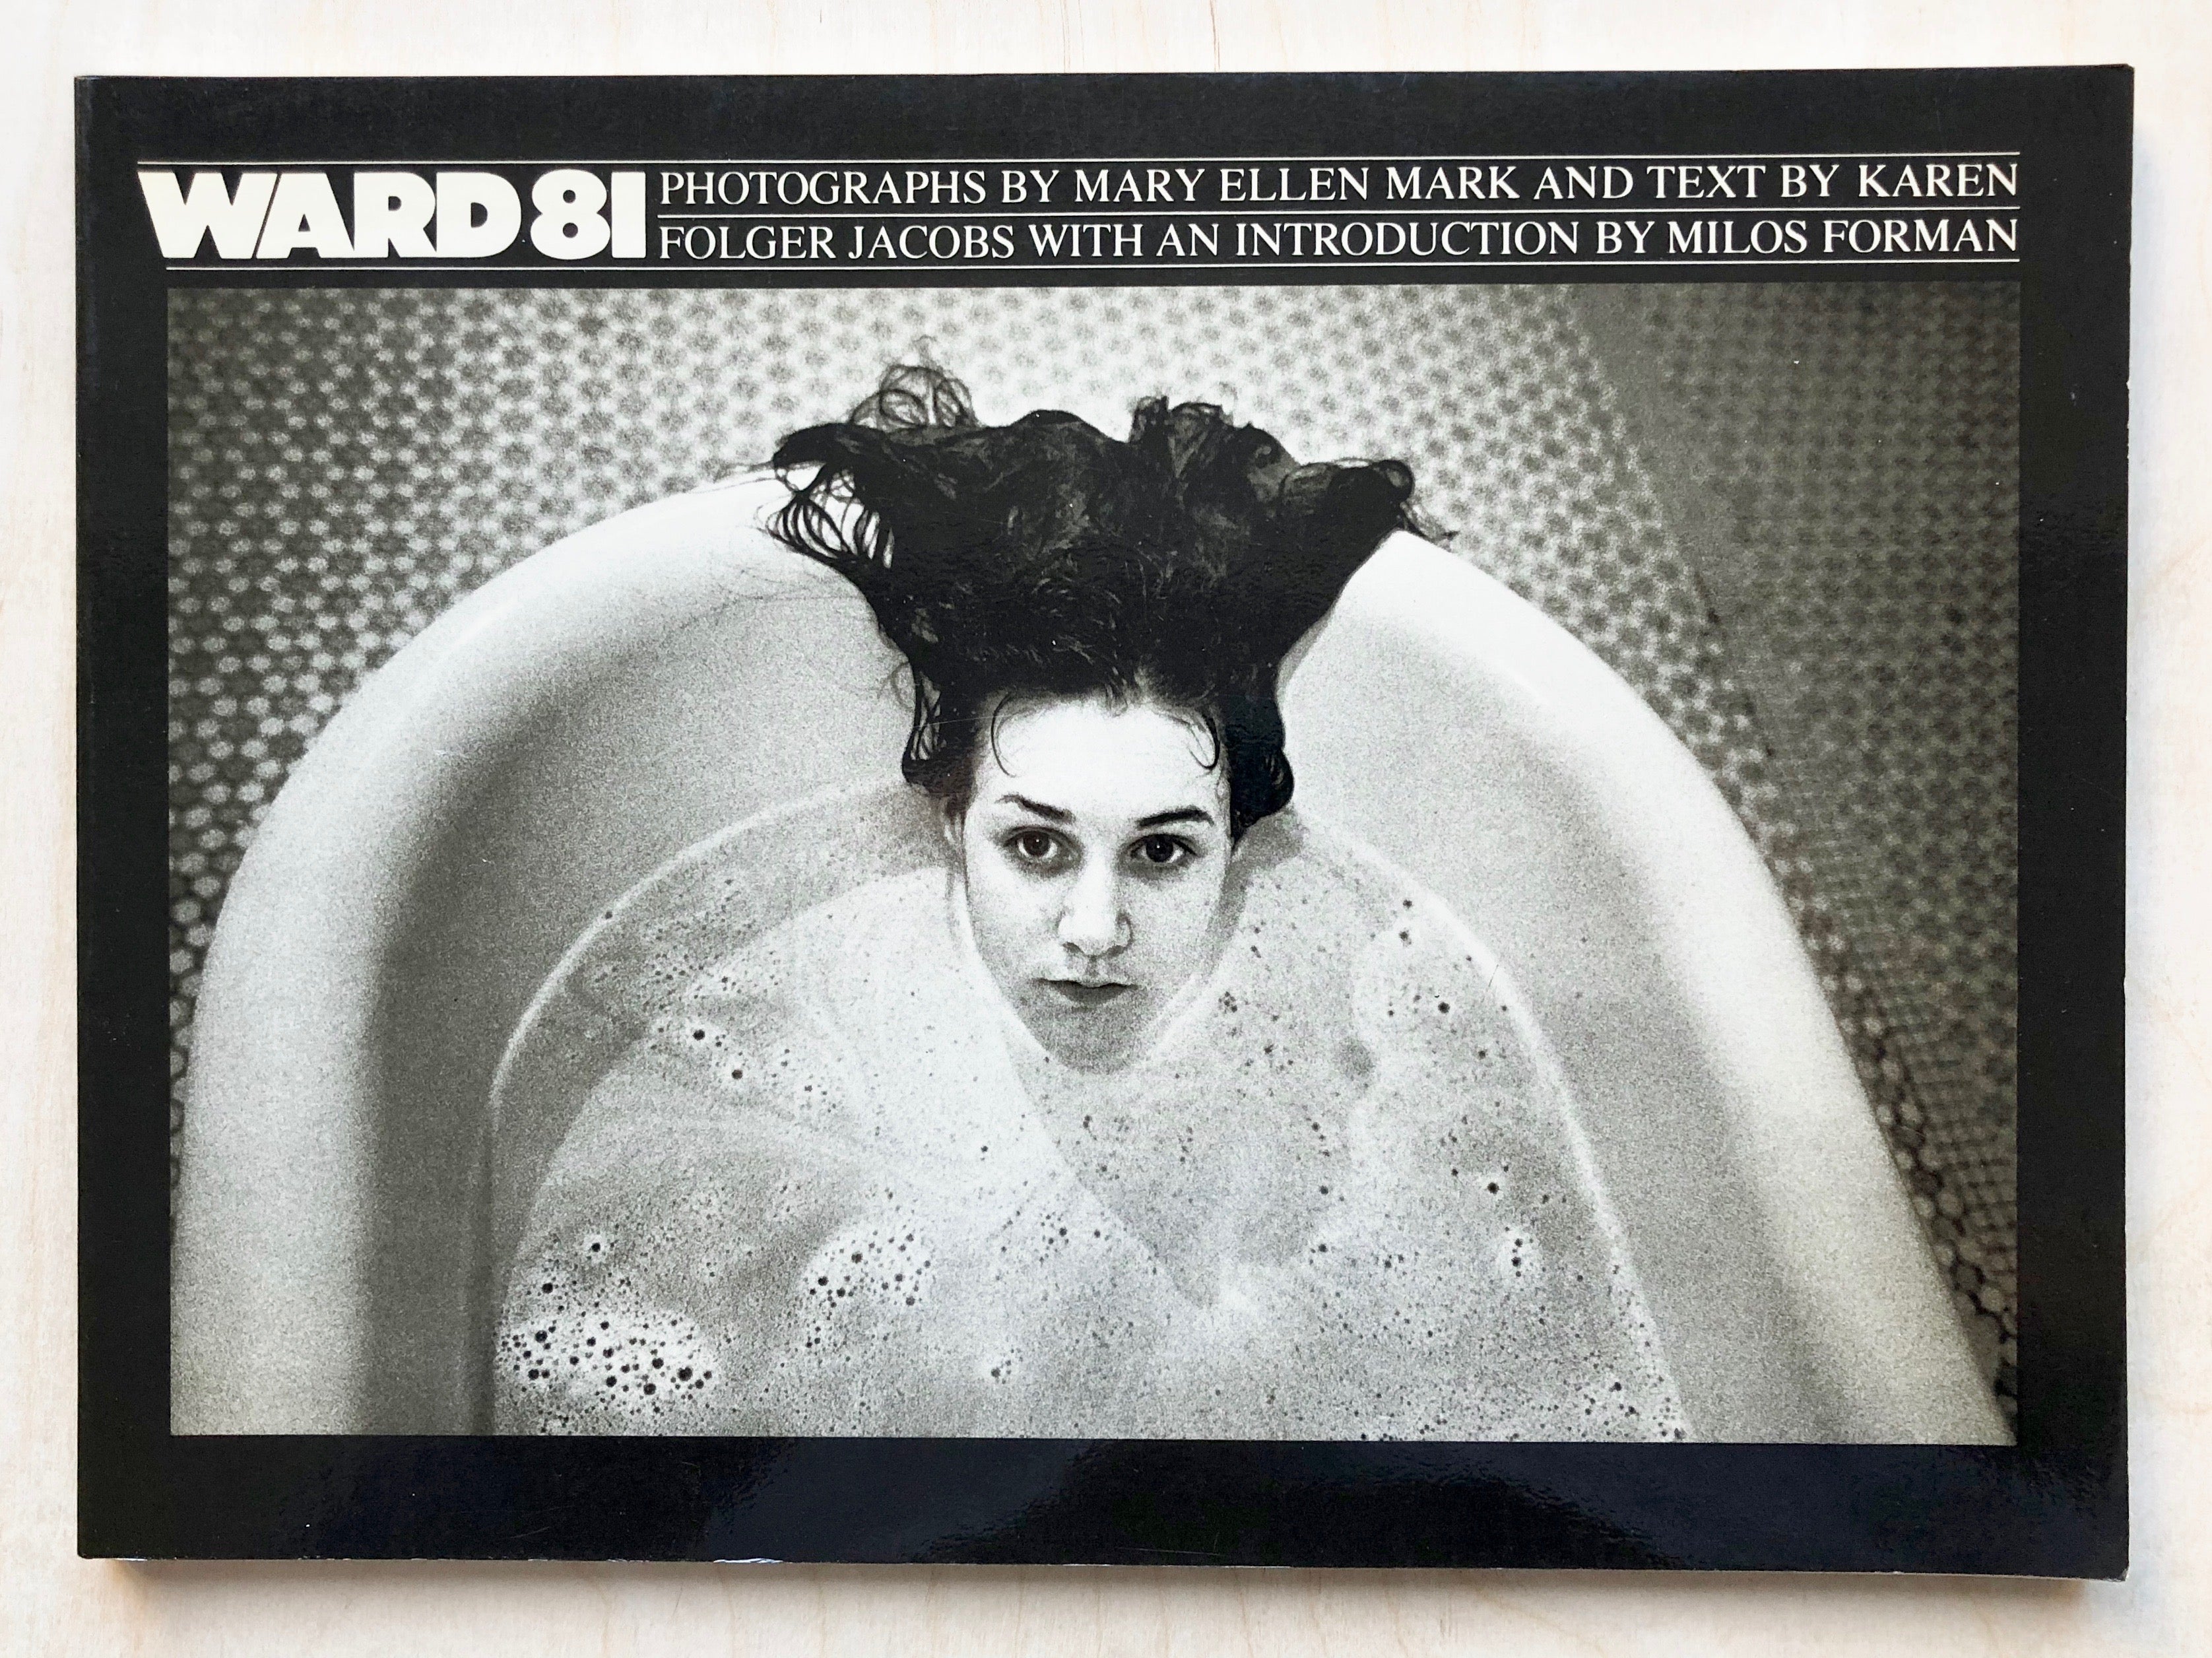 WARD 81 by Mary Ellen Mark with text by Karen Folger Jacobs and an  introduction by Milos Forman